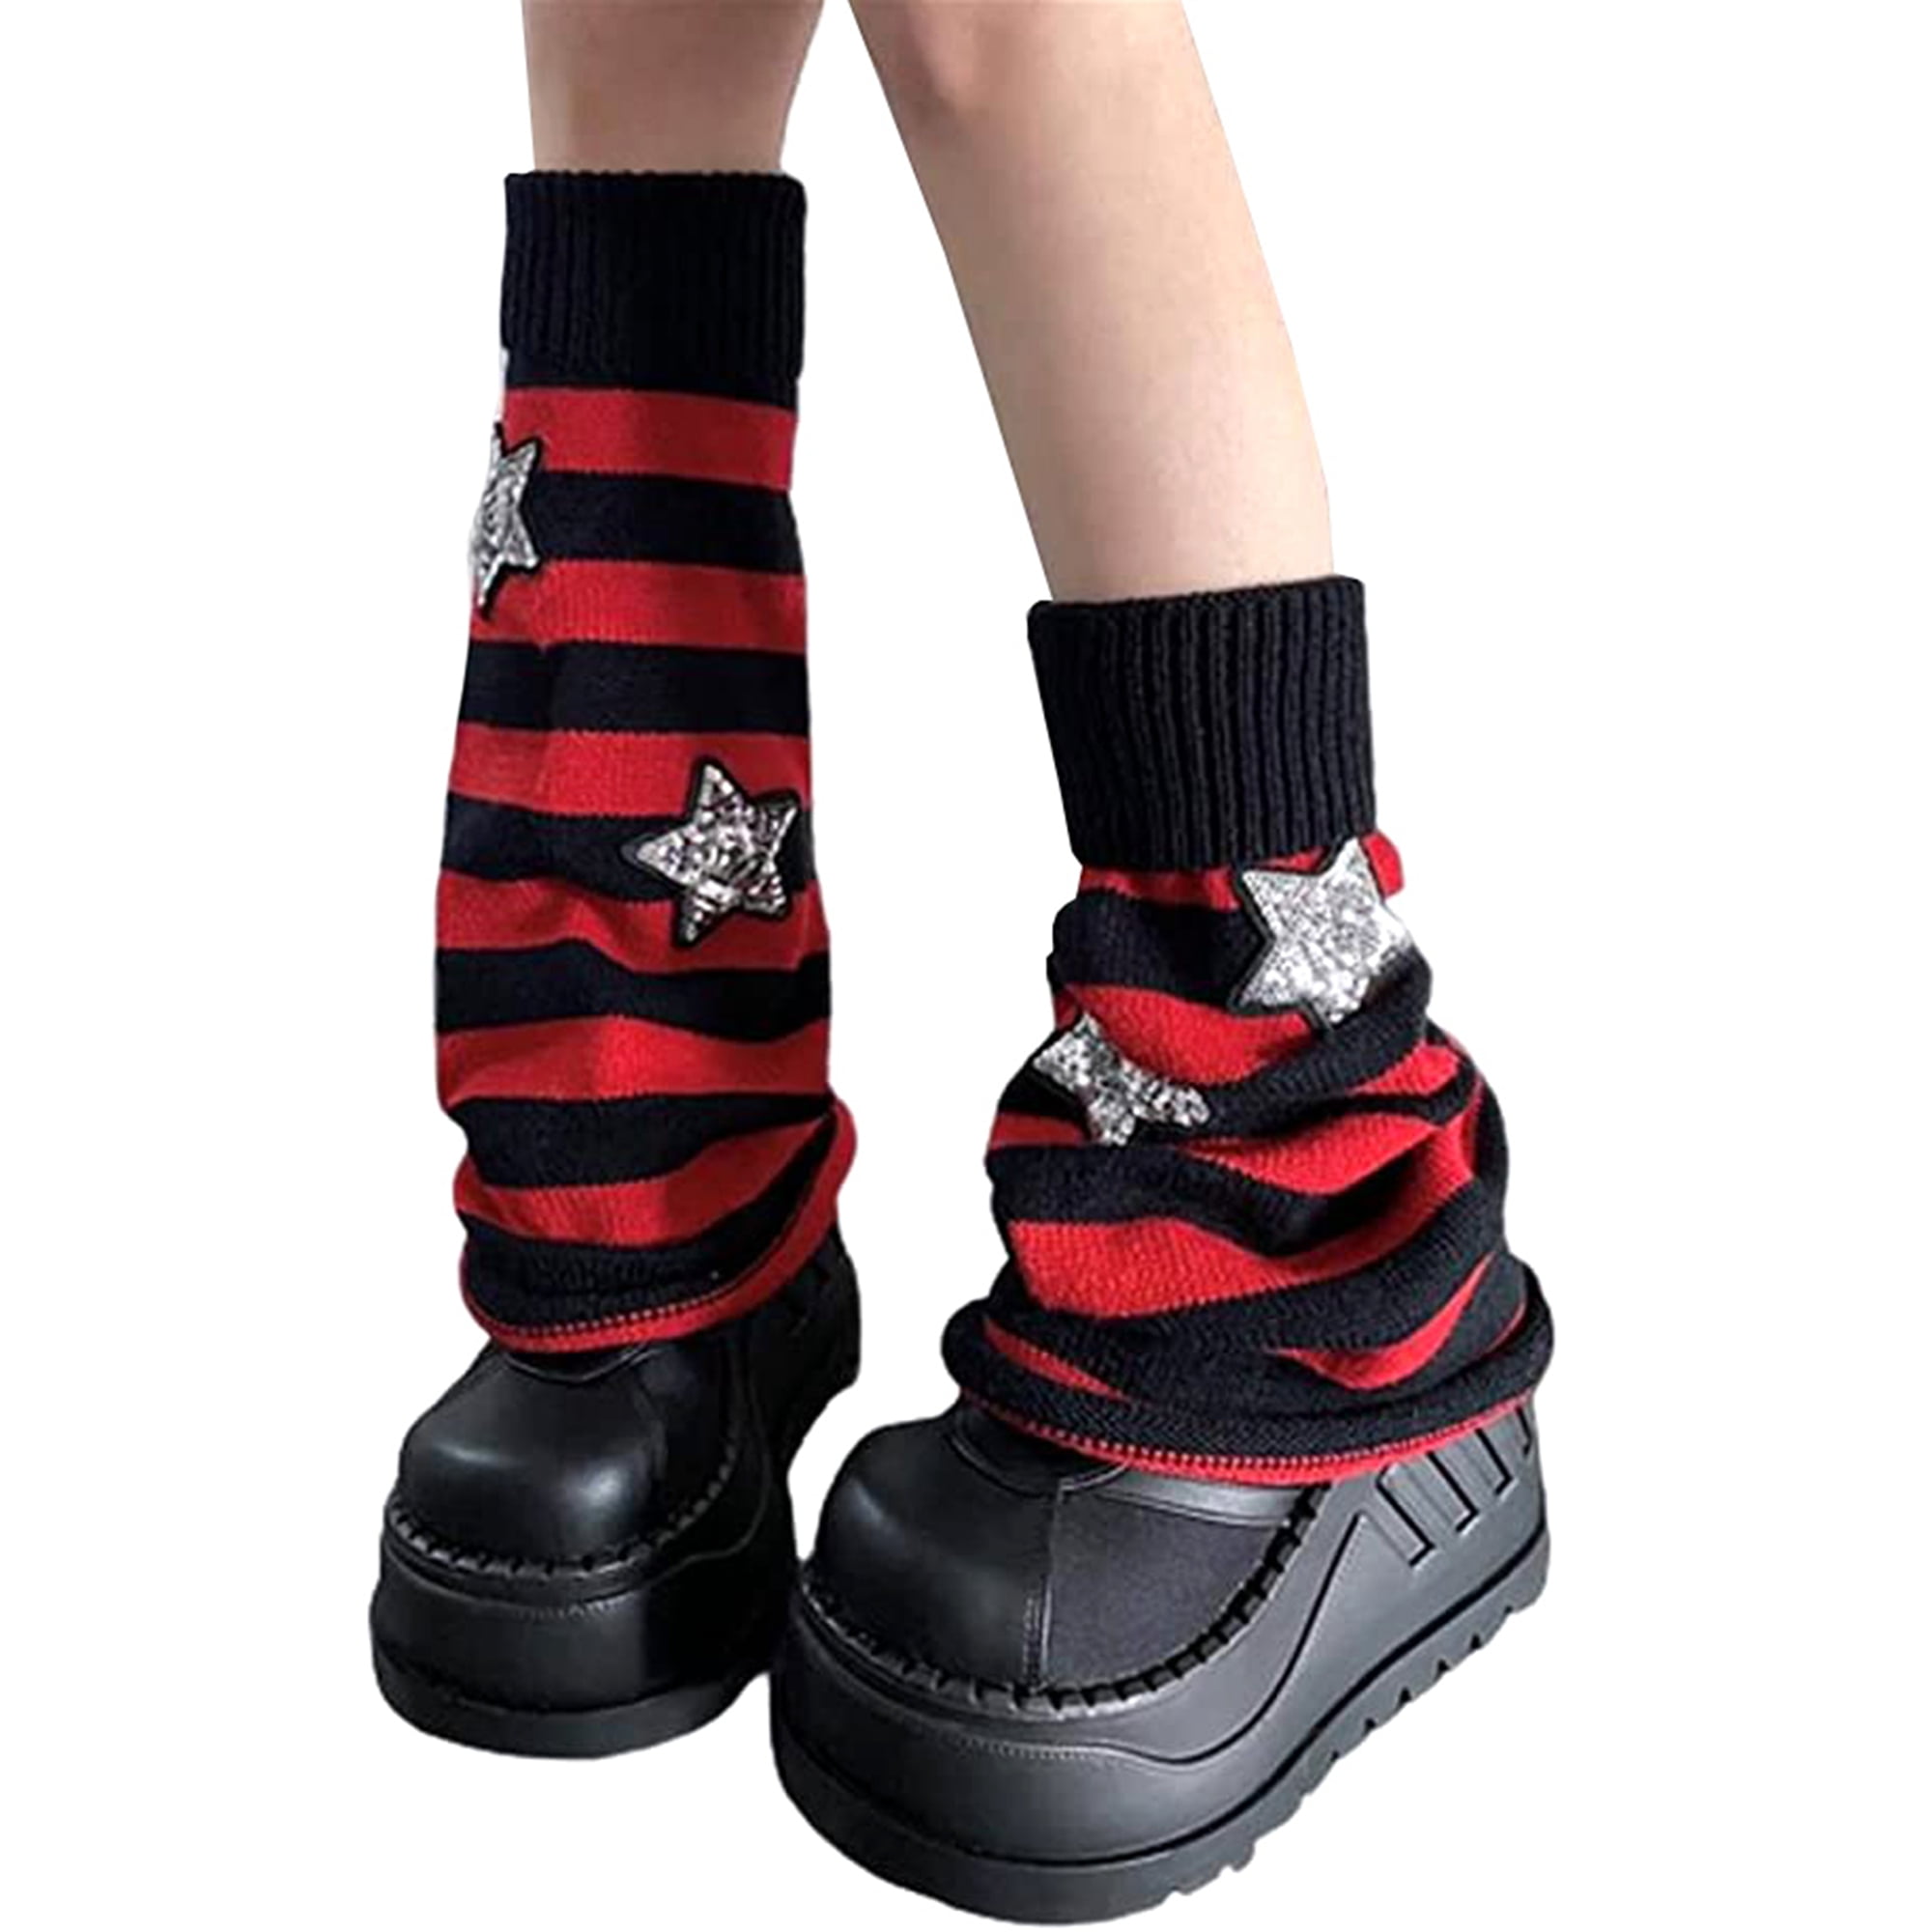 Womens Star Striped Leg Warmers-Lolita Boot Stockings 80s Party